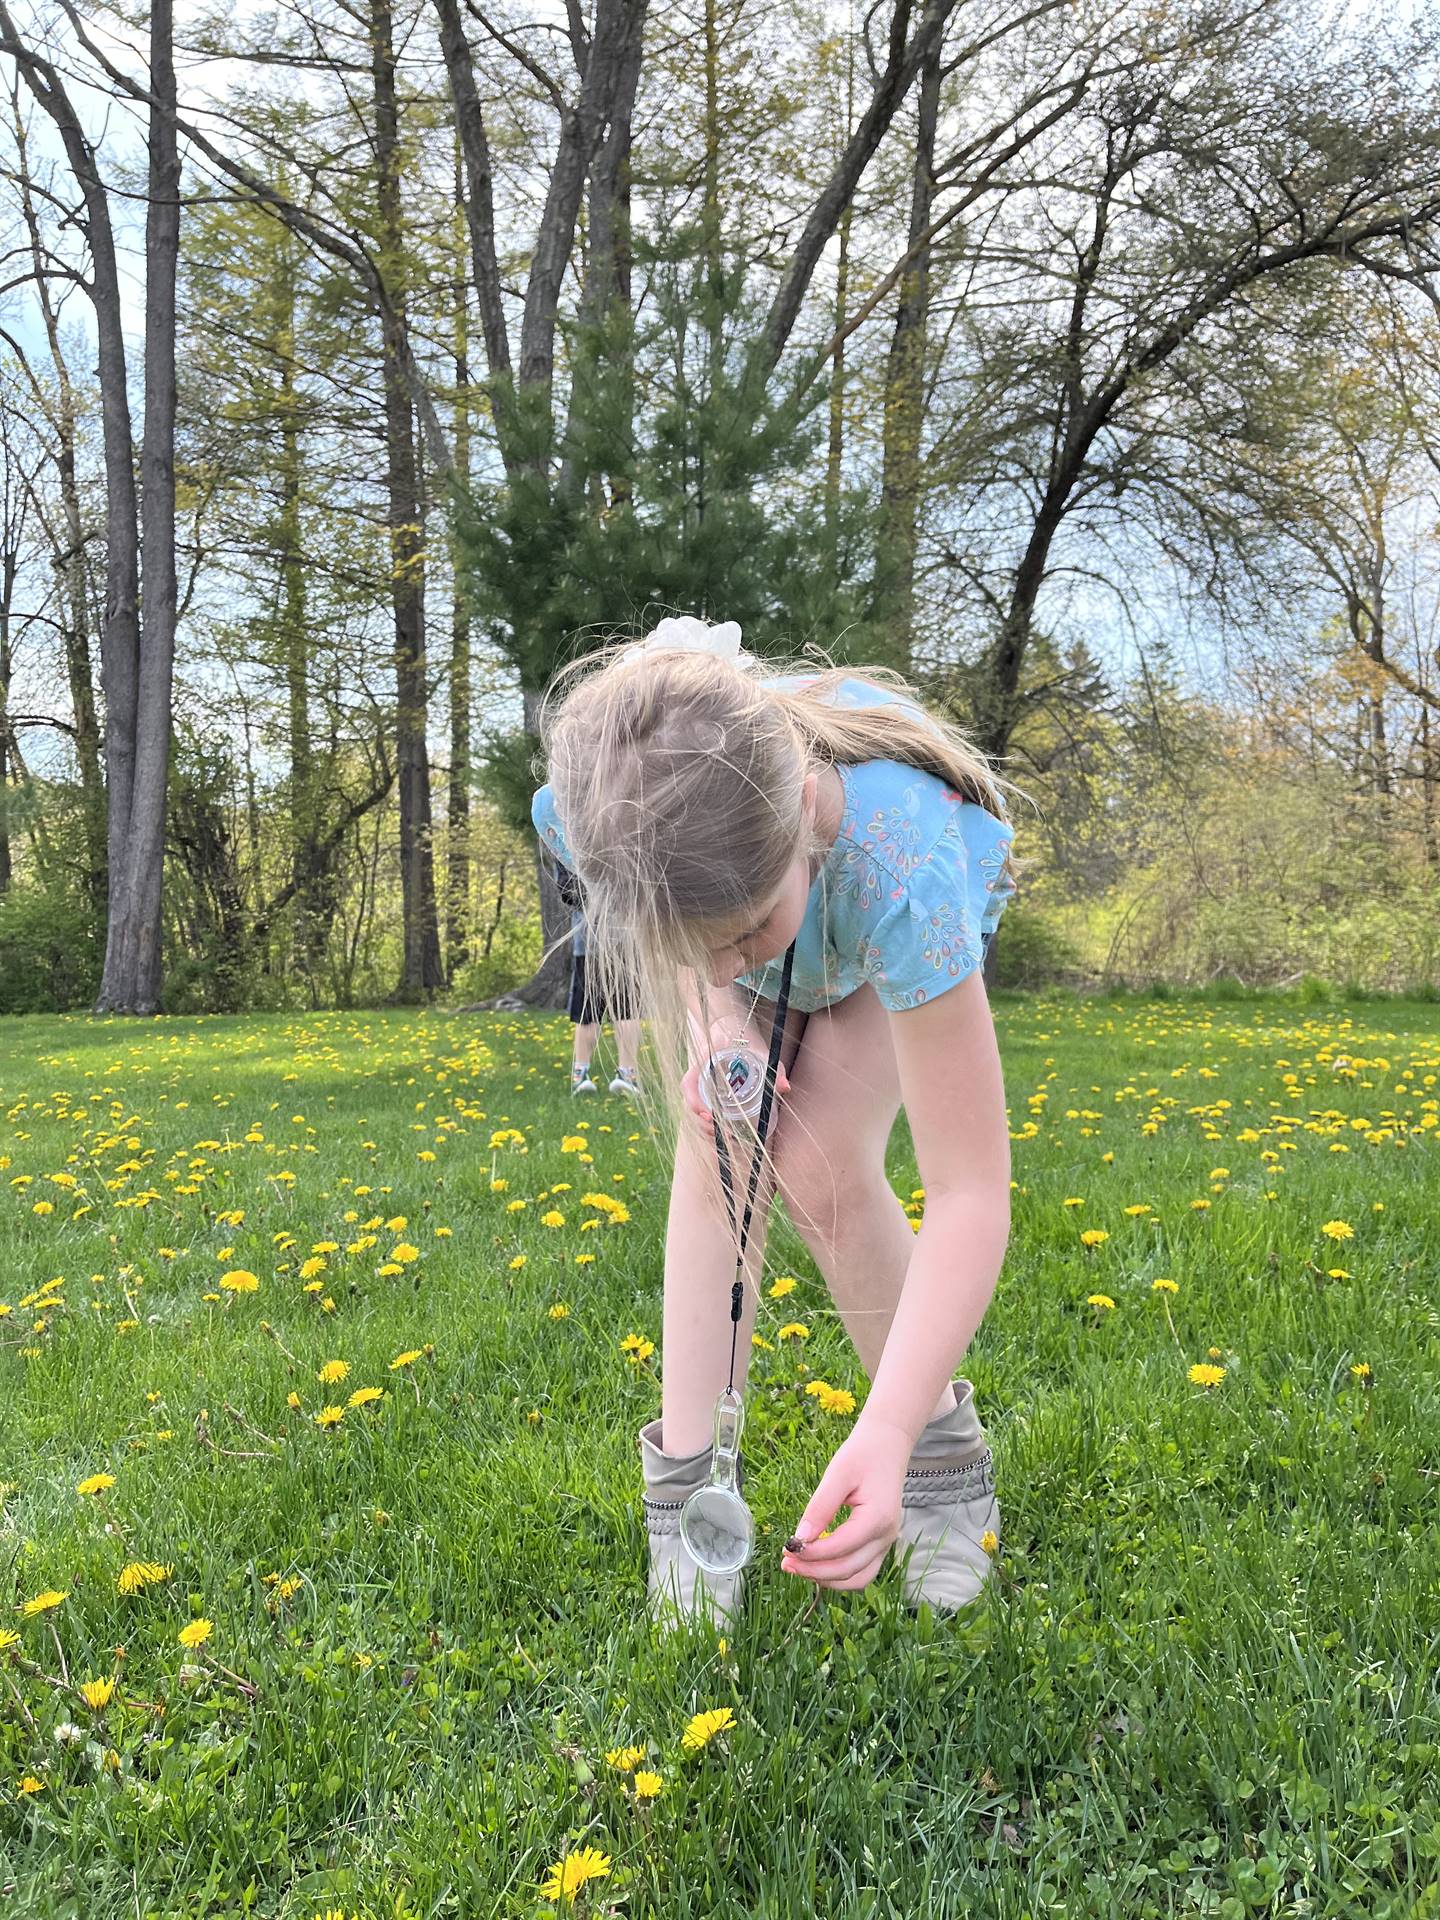 a student bends over to get a nature treasure out of grass